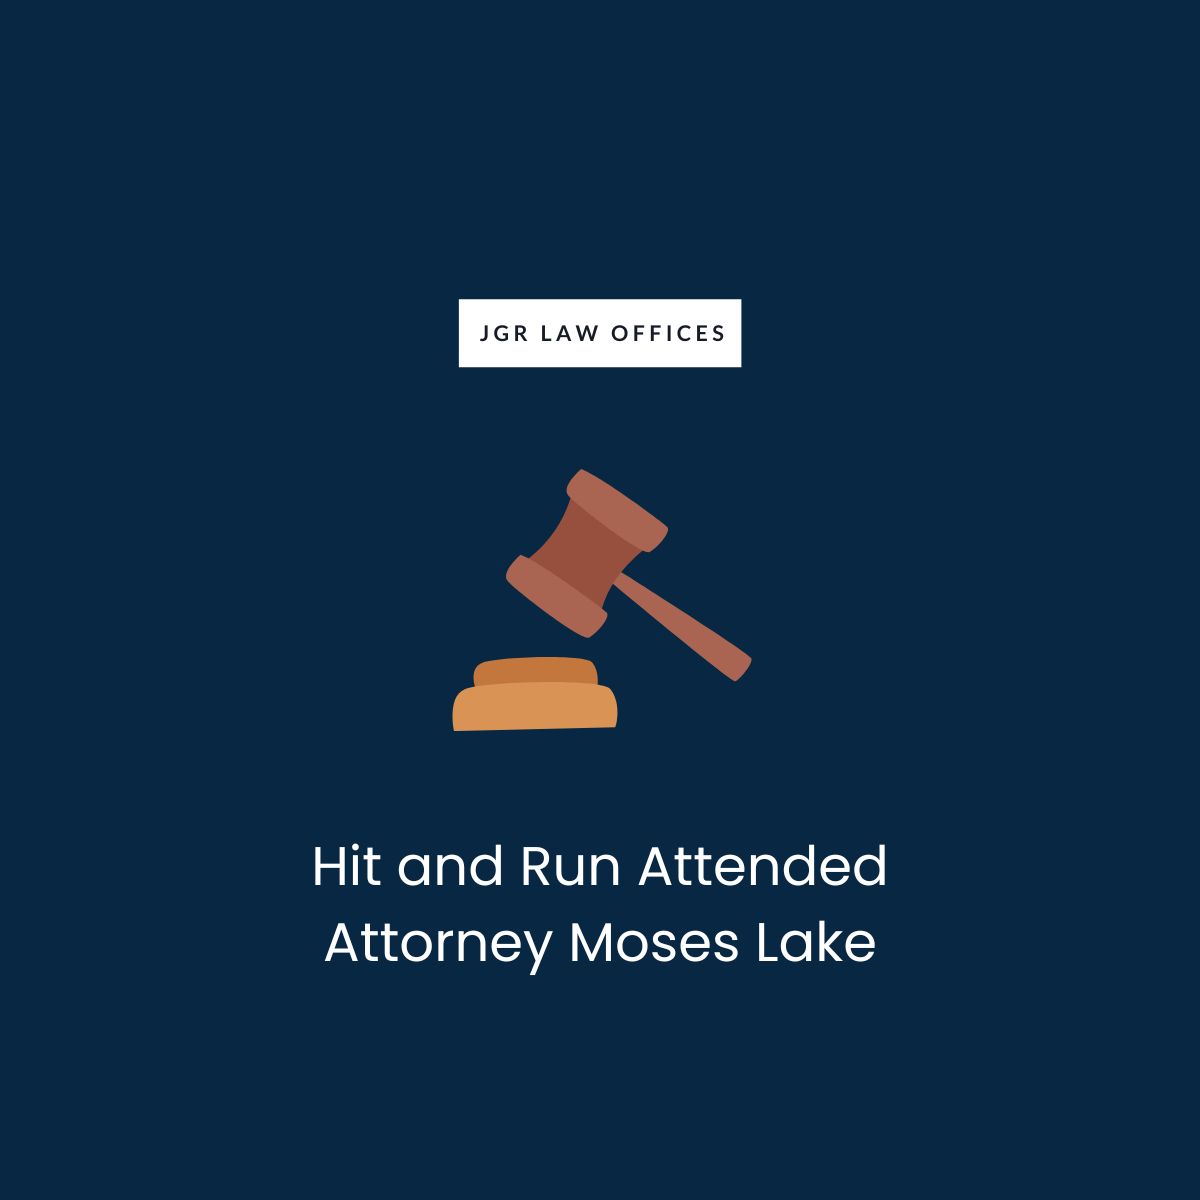 Hit and Run Attended Attorney Moses Lake